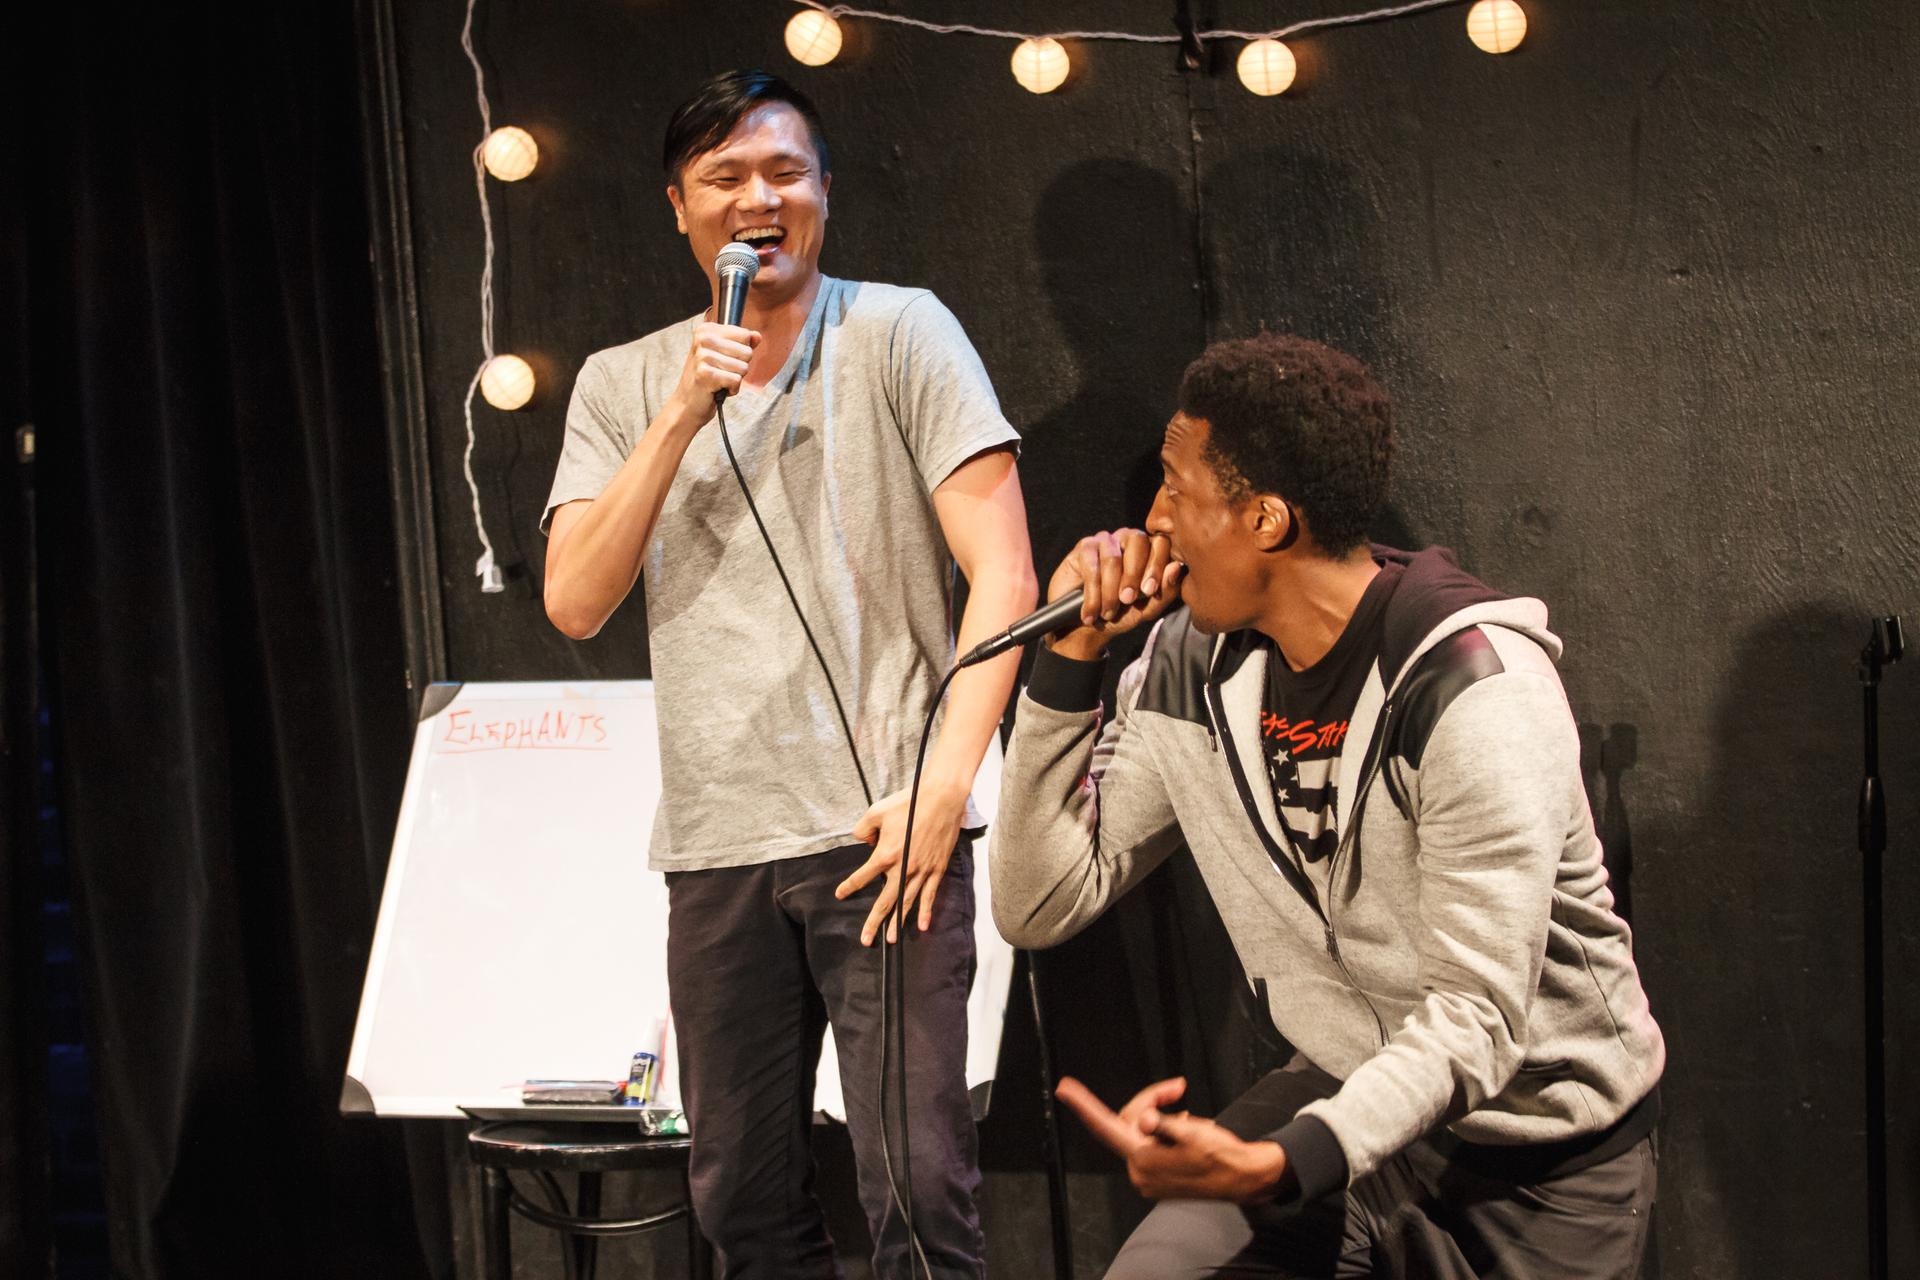 Two performers with microphones are laughing and performing their rap.